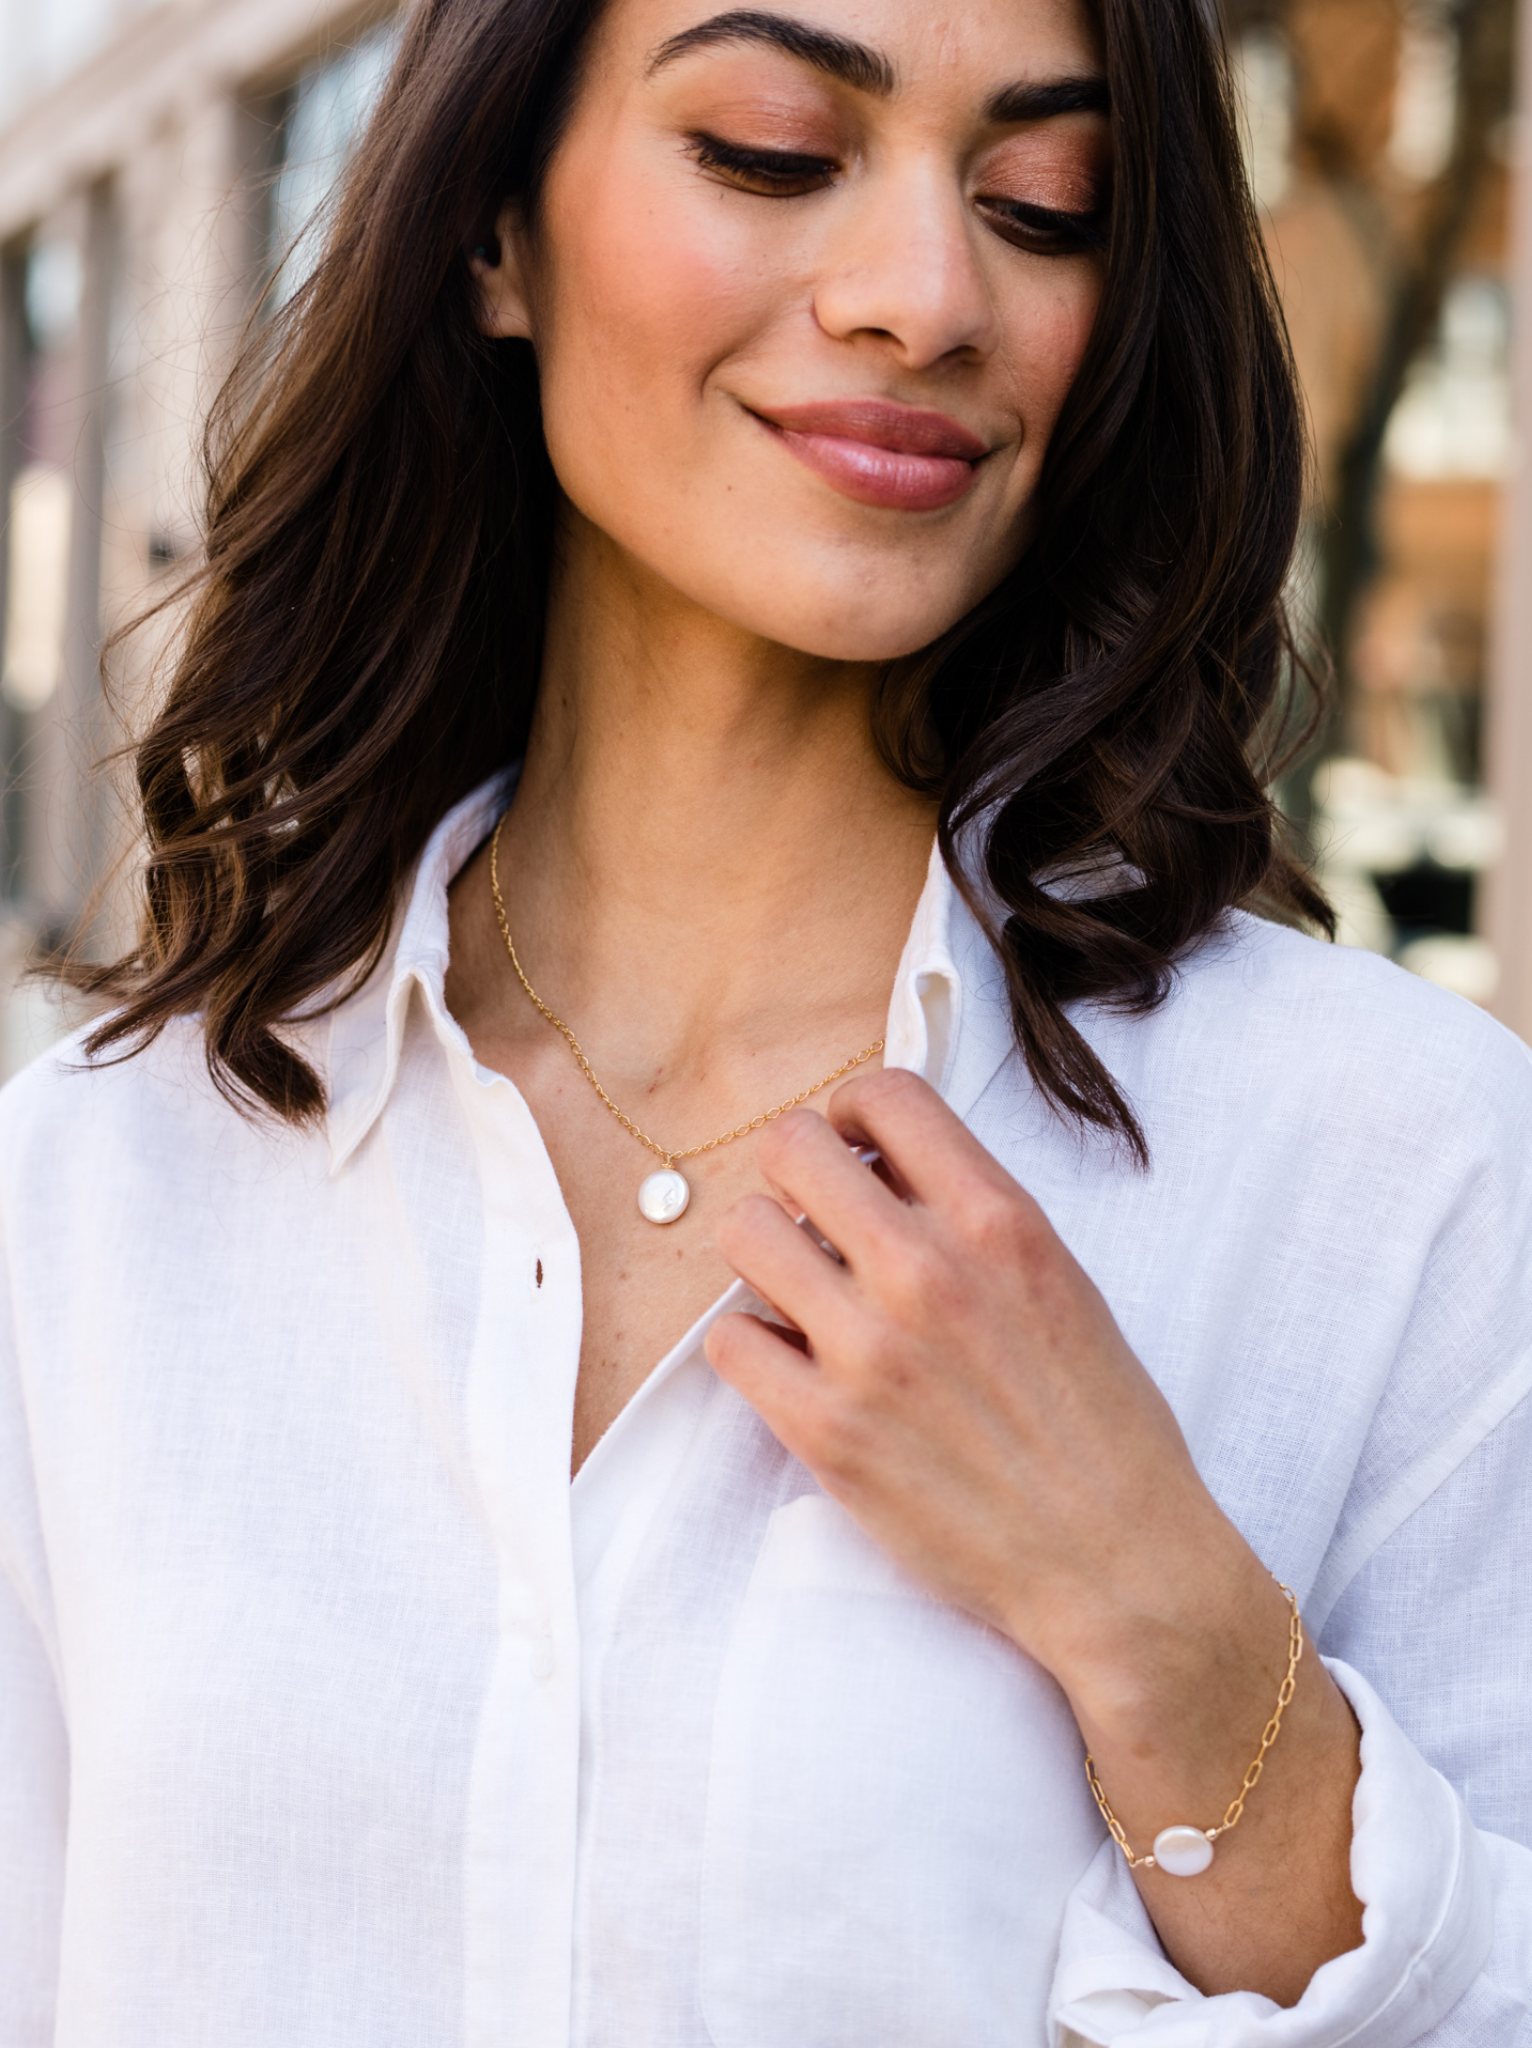 Woman in white shirt with a gold necklace and bracelet.